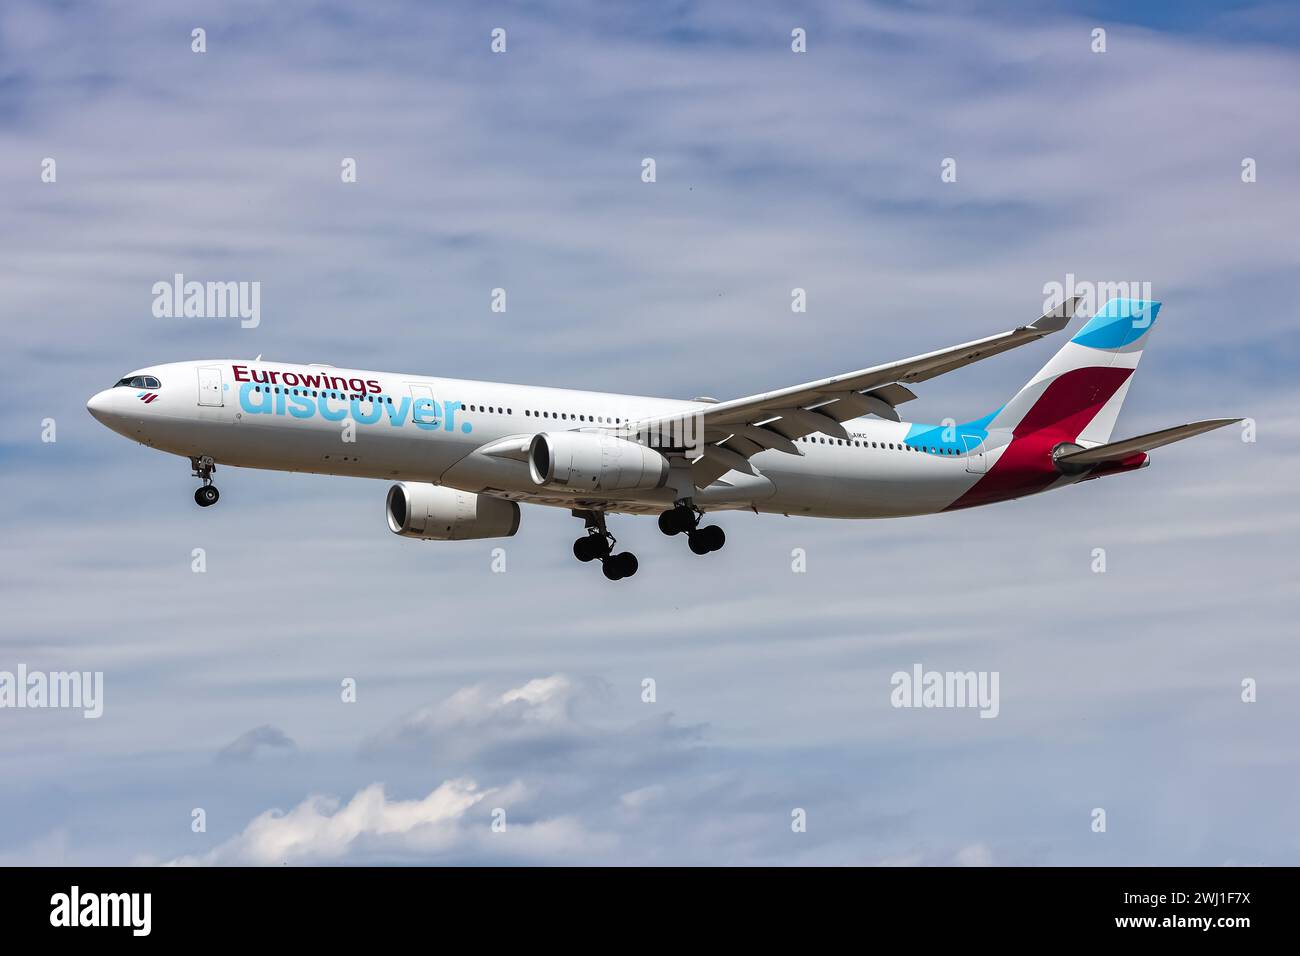 Eurowings Discover Airbus A330-300 aircraft Frankfurt Airport in Germany Stock Photo